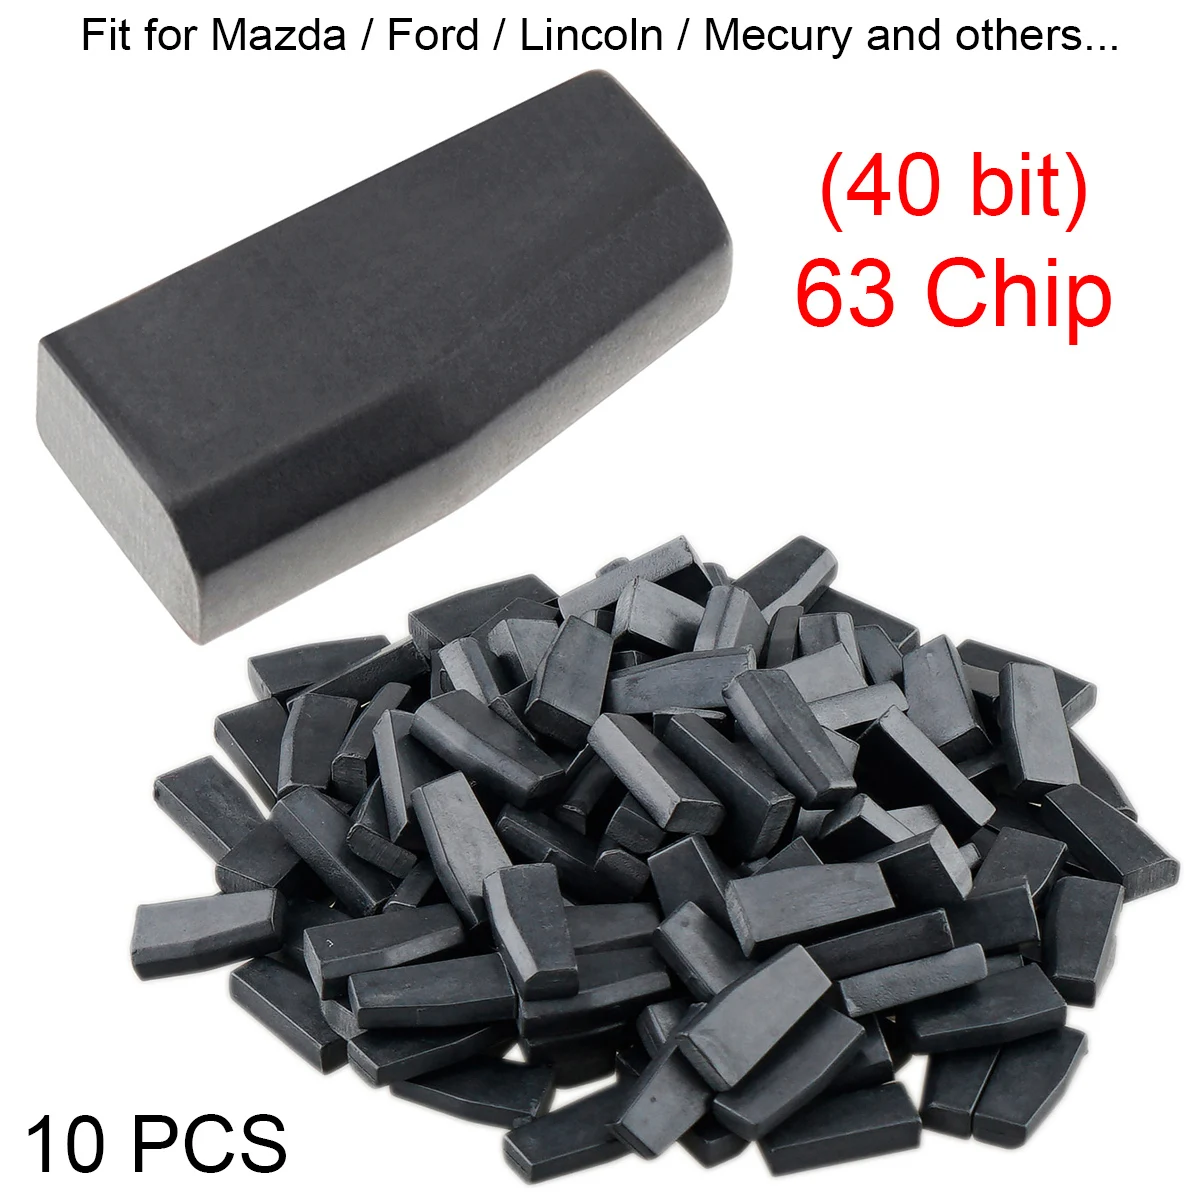 

10pcs Blank 4D63 40Bit Carbon Chip Car Key Transponder Chip Replament Fit for Mazda Ford Lincoln Mecury Cars Vehicle